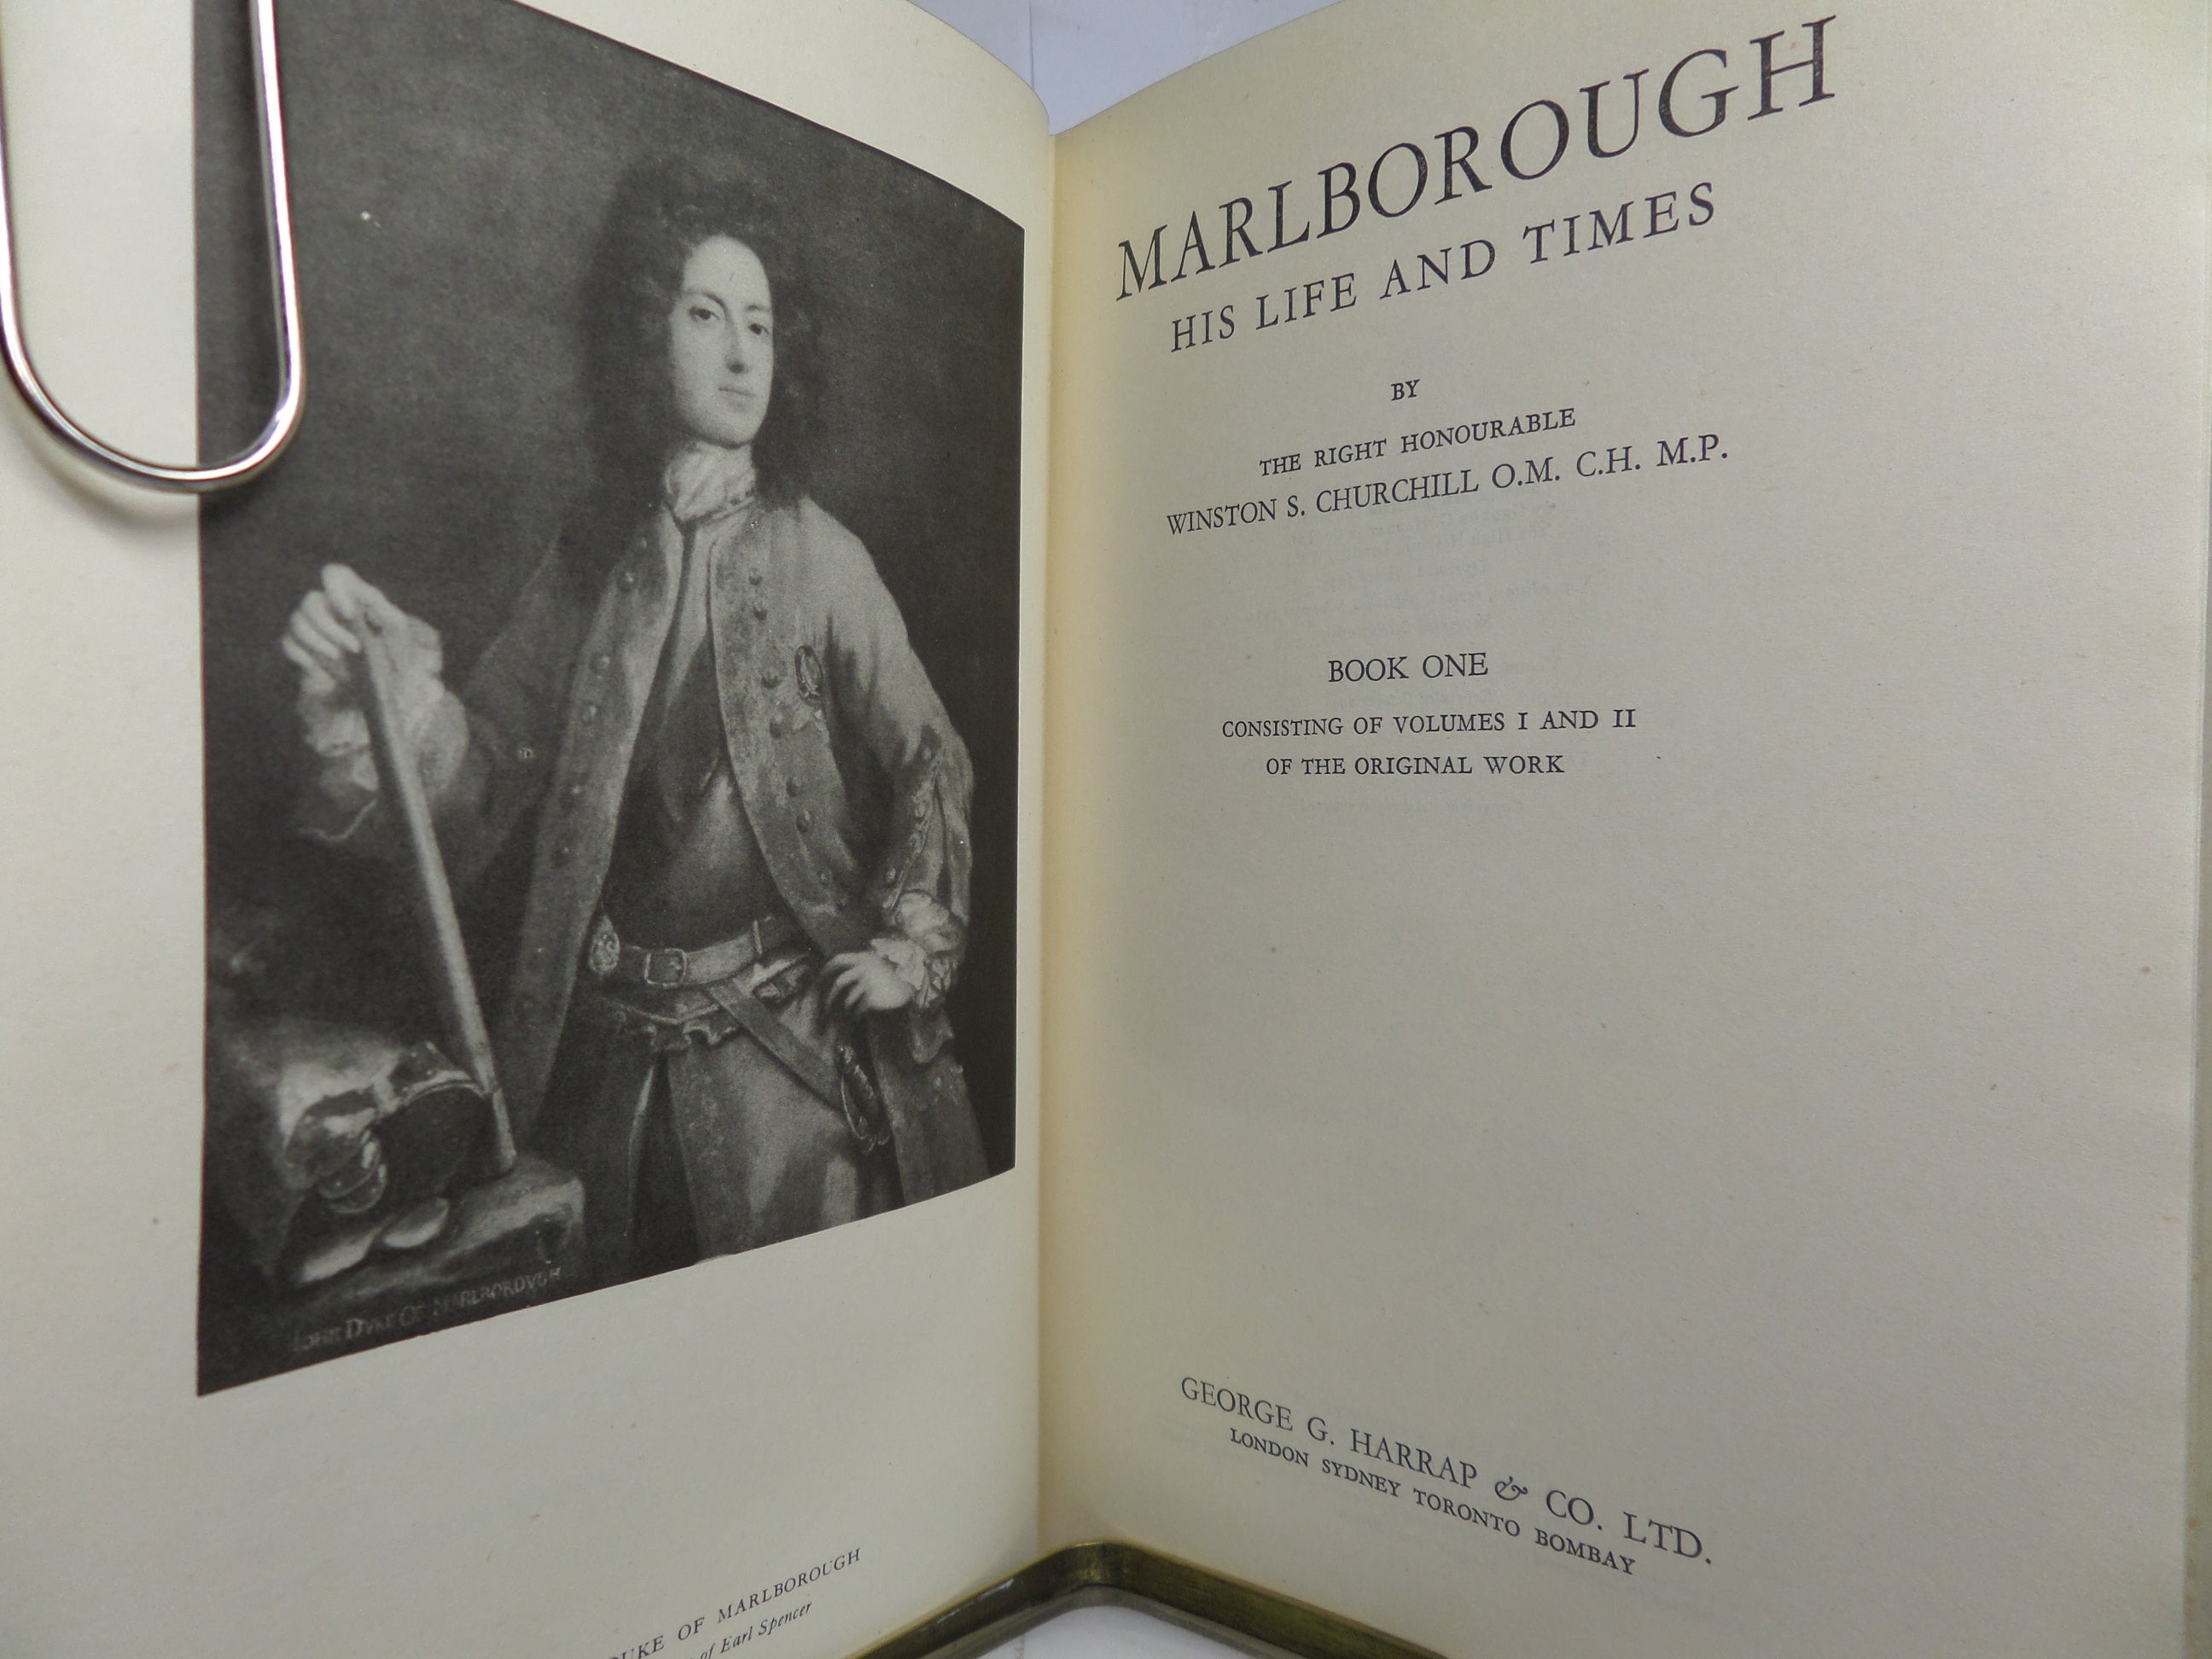 MARLBOROUGH HIS LIFE & TIMES BY WINSTON CHURCHILL 1947 IN TWO VOLUMES